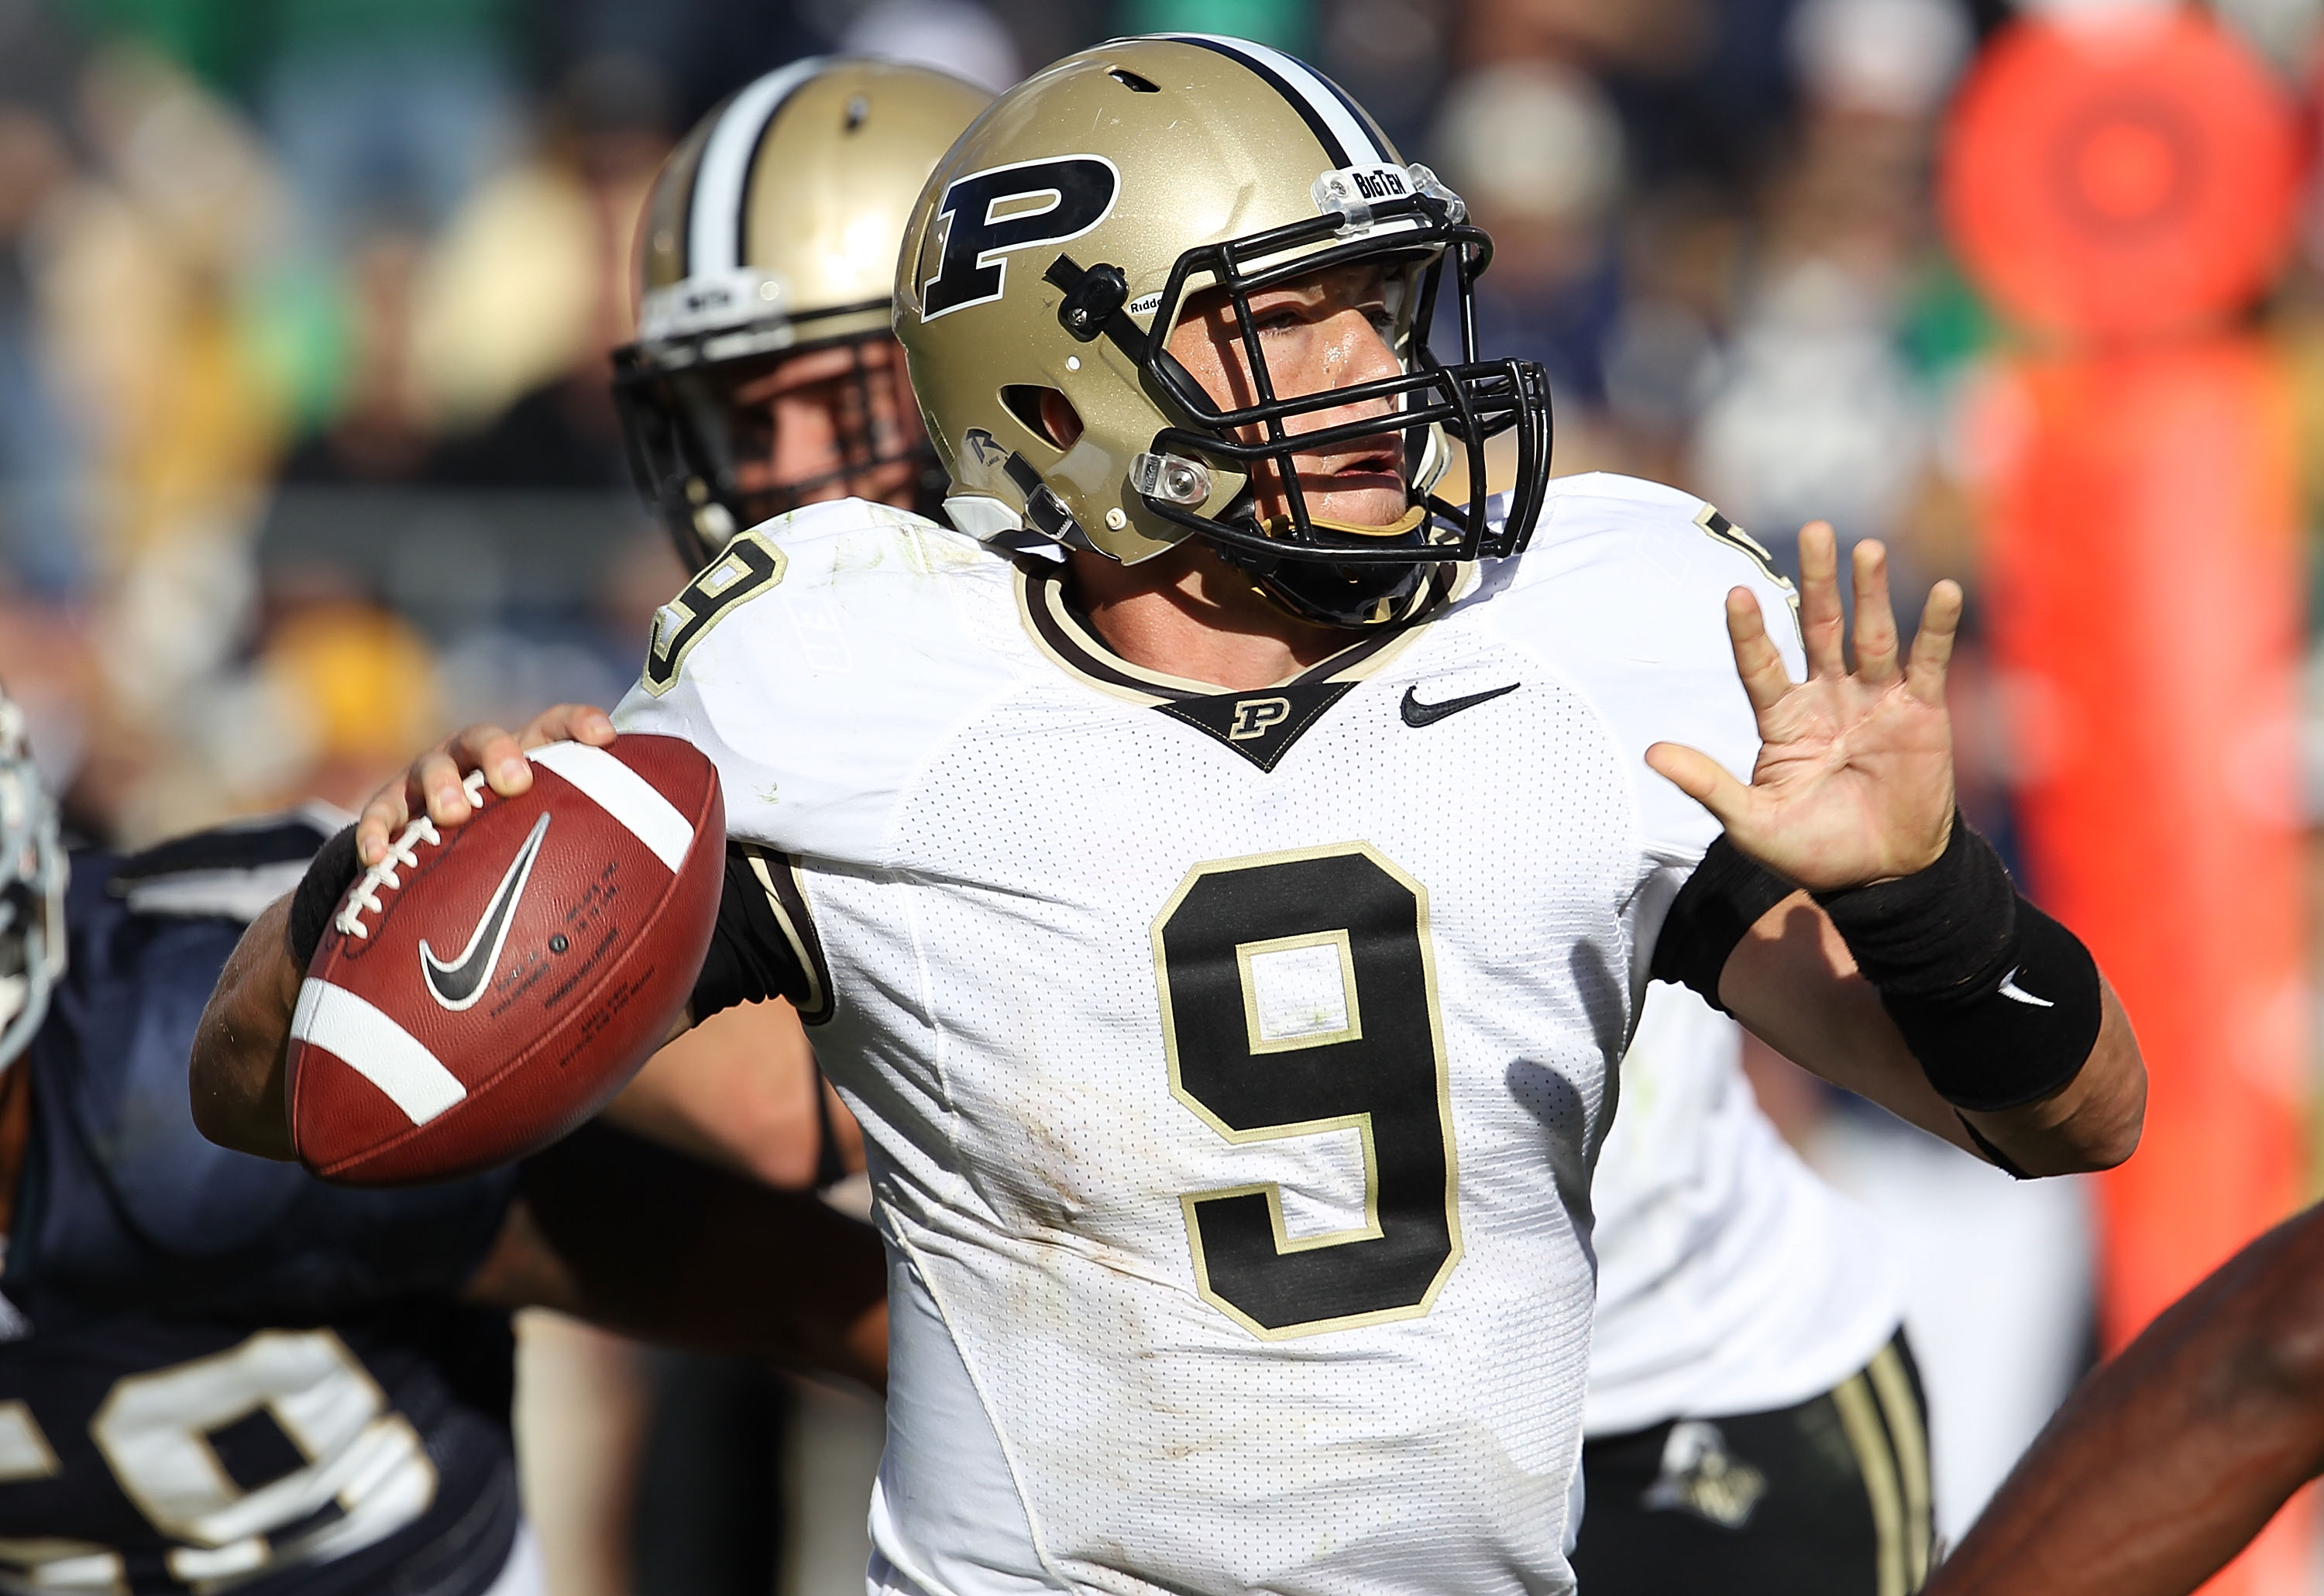 SOUTH BEND, IN - SEPTEMBER 04: Robert Marve #9 of the Purdue Boilermakers throws a pass against the Notre Dame Fighting Irish at Notre Dame Stadium on September 4, 2010 in South Bend, Indiana. Notre Dame defated Purdue 23-12. (Photo by Jonathan Daniel/Get